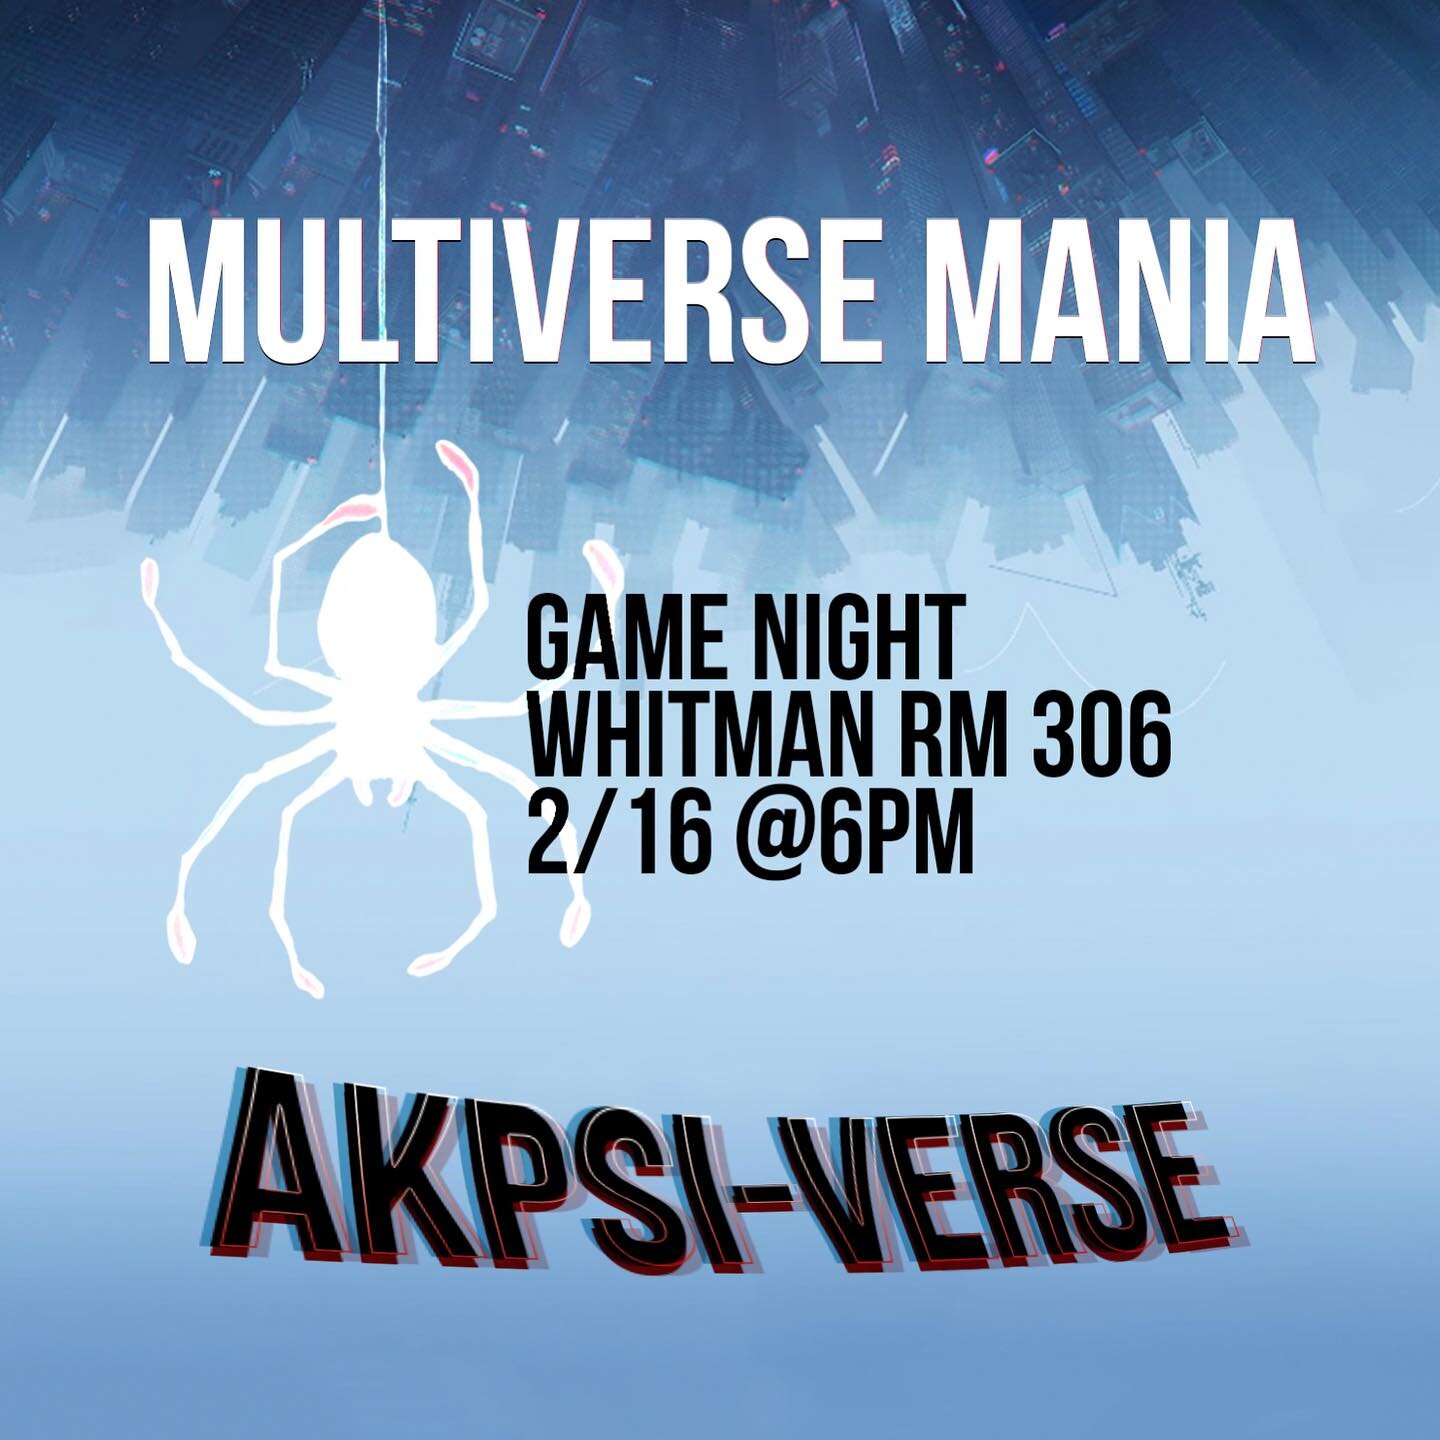 RECRUITMENT DAY 5: MULTIVERSE MANIA

Happy last day of recruitment!! Join us TODAY 6pm in Whitman RM 306 for a competitive night of minute-to-win-it games 🕷️🕸️